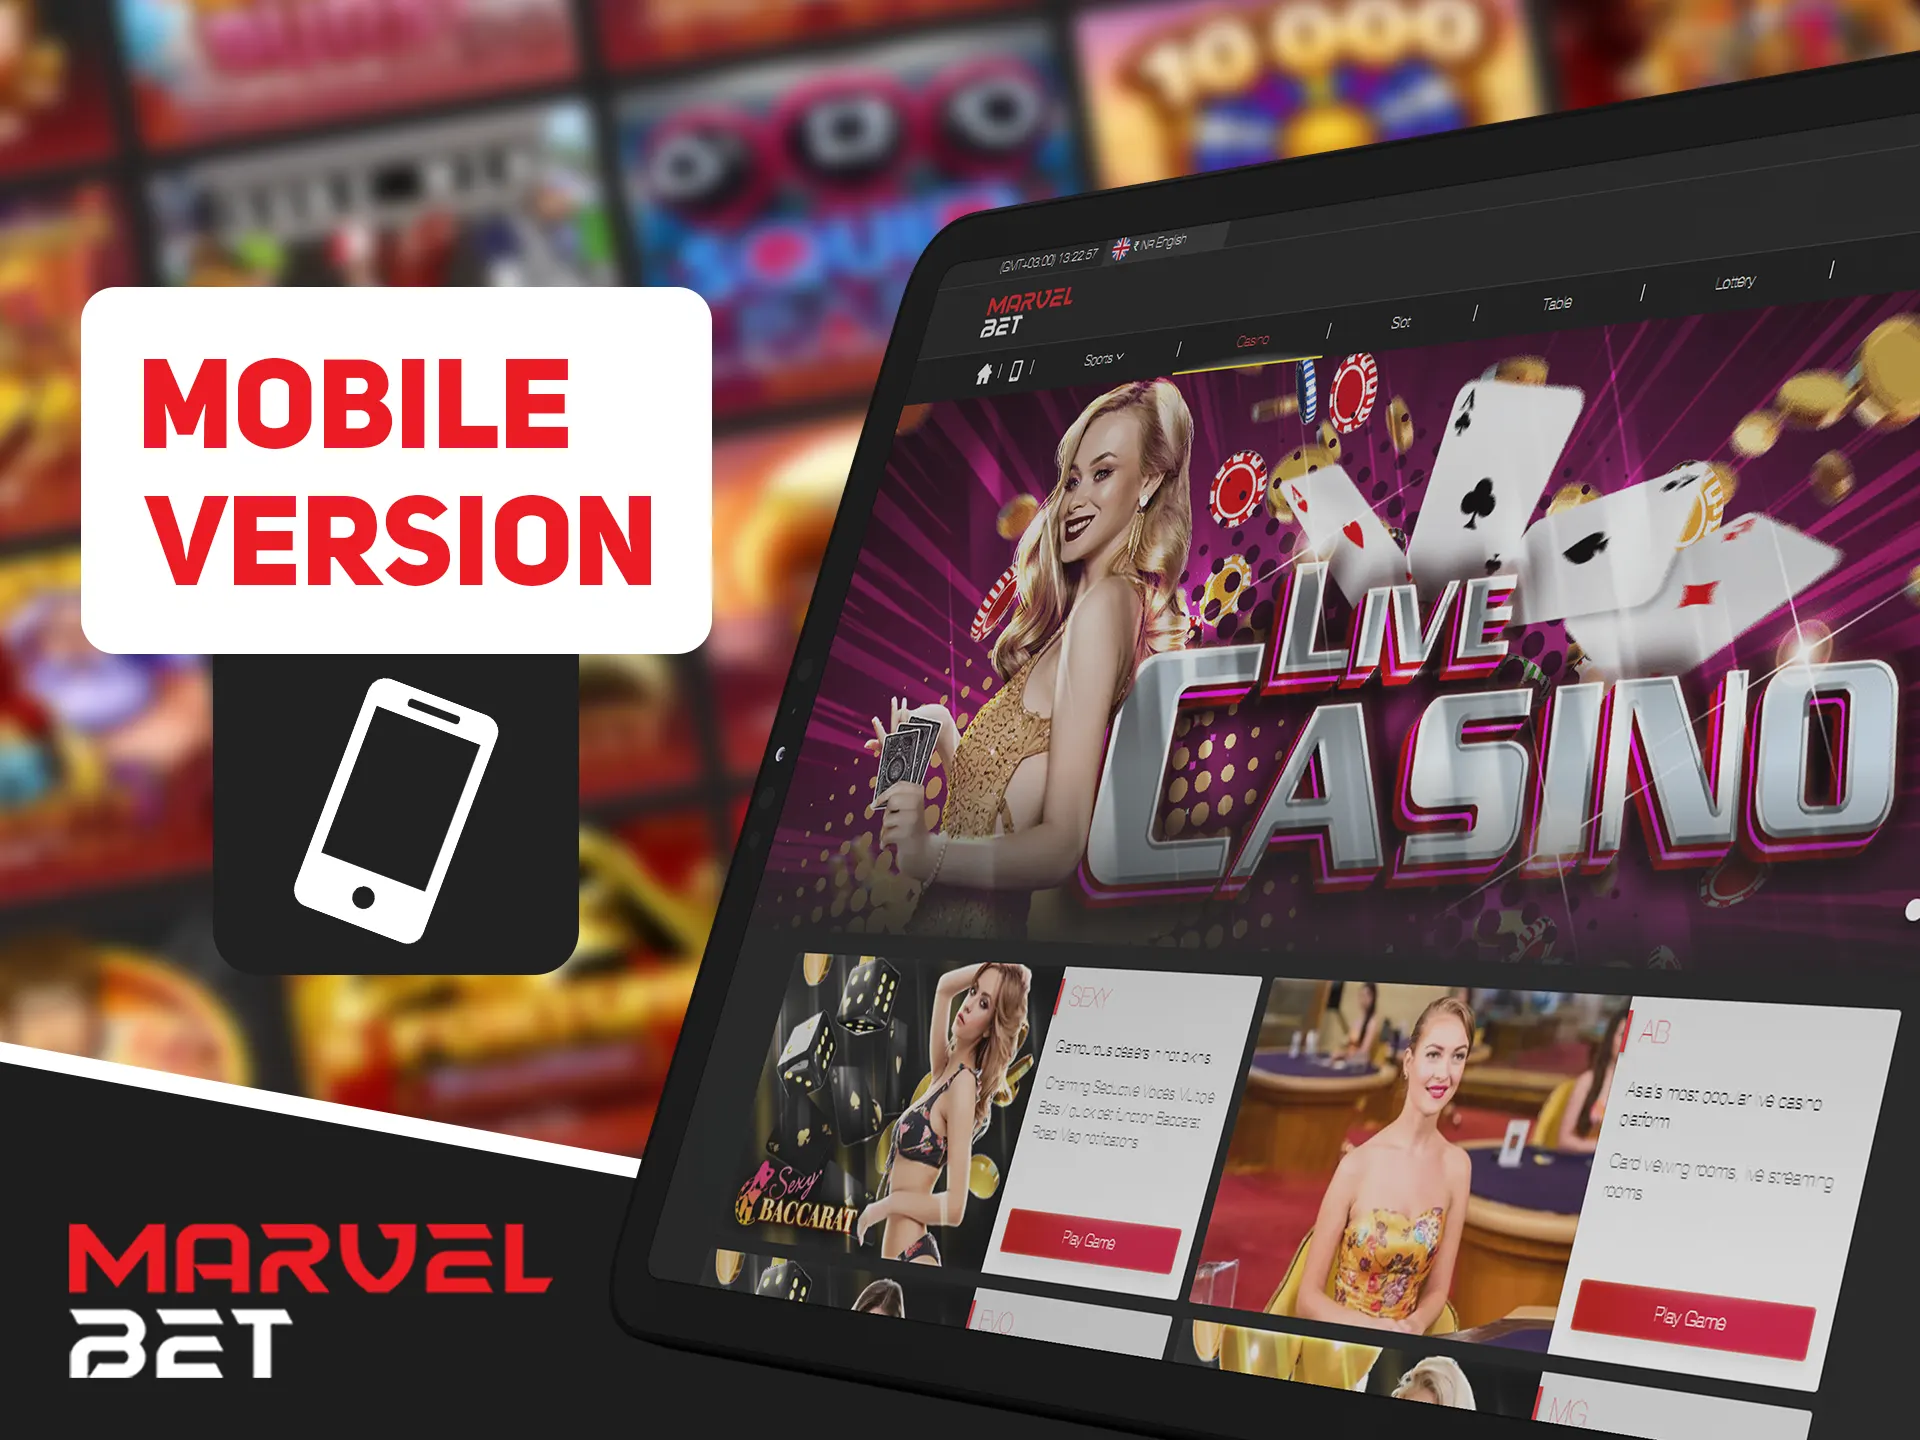 Use Marvelbet website on any mobile device.